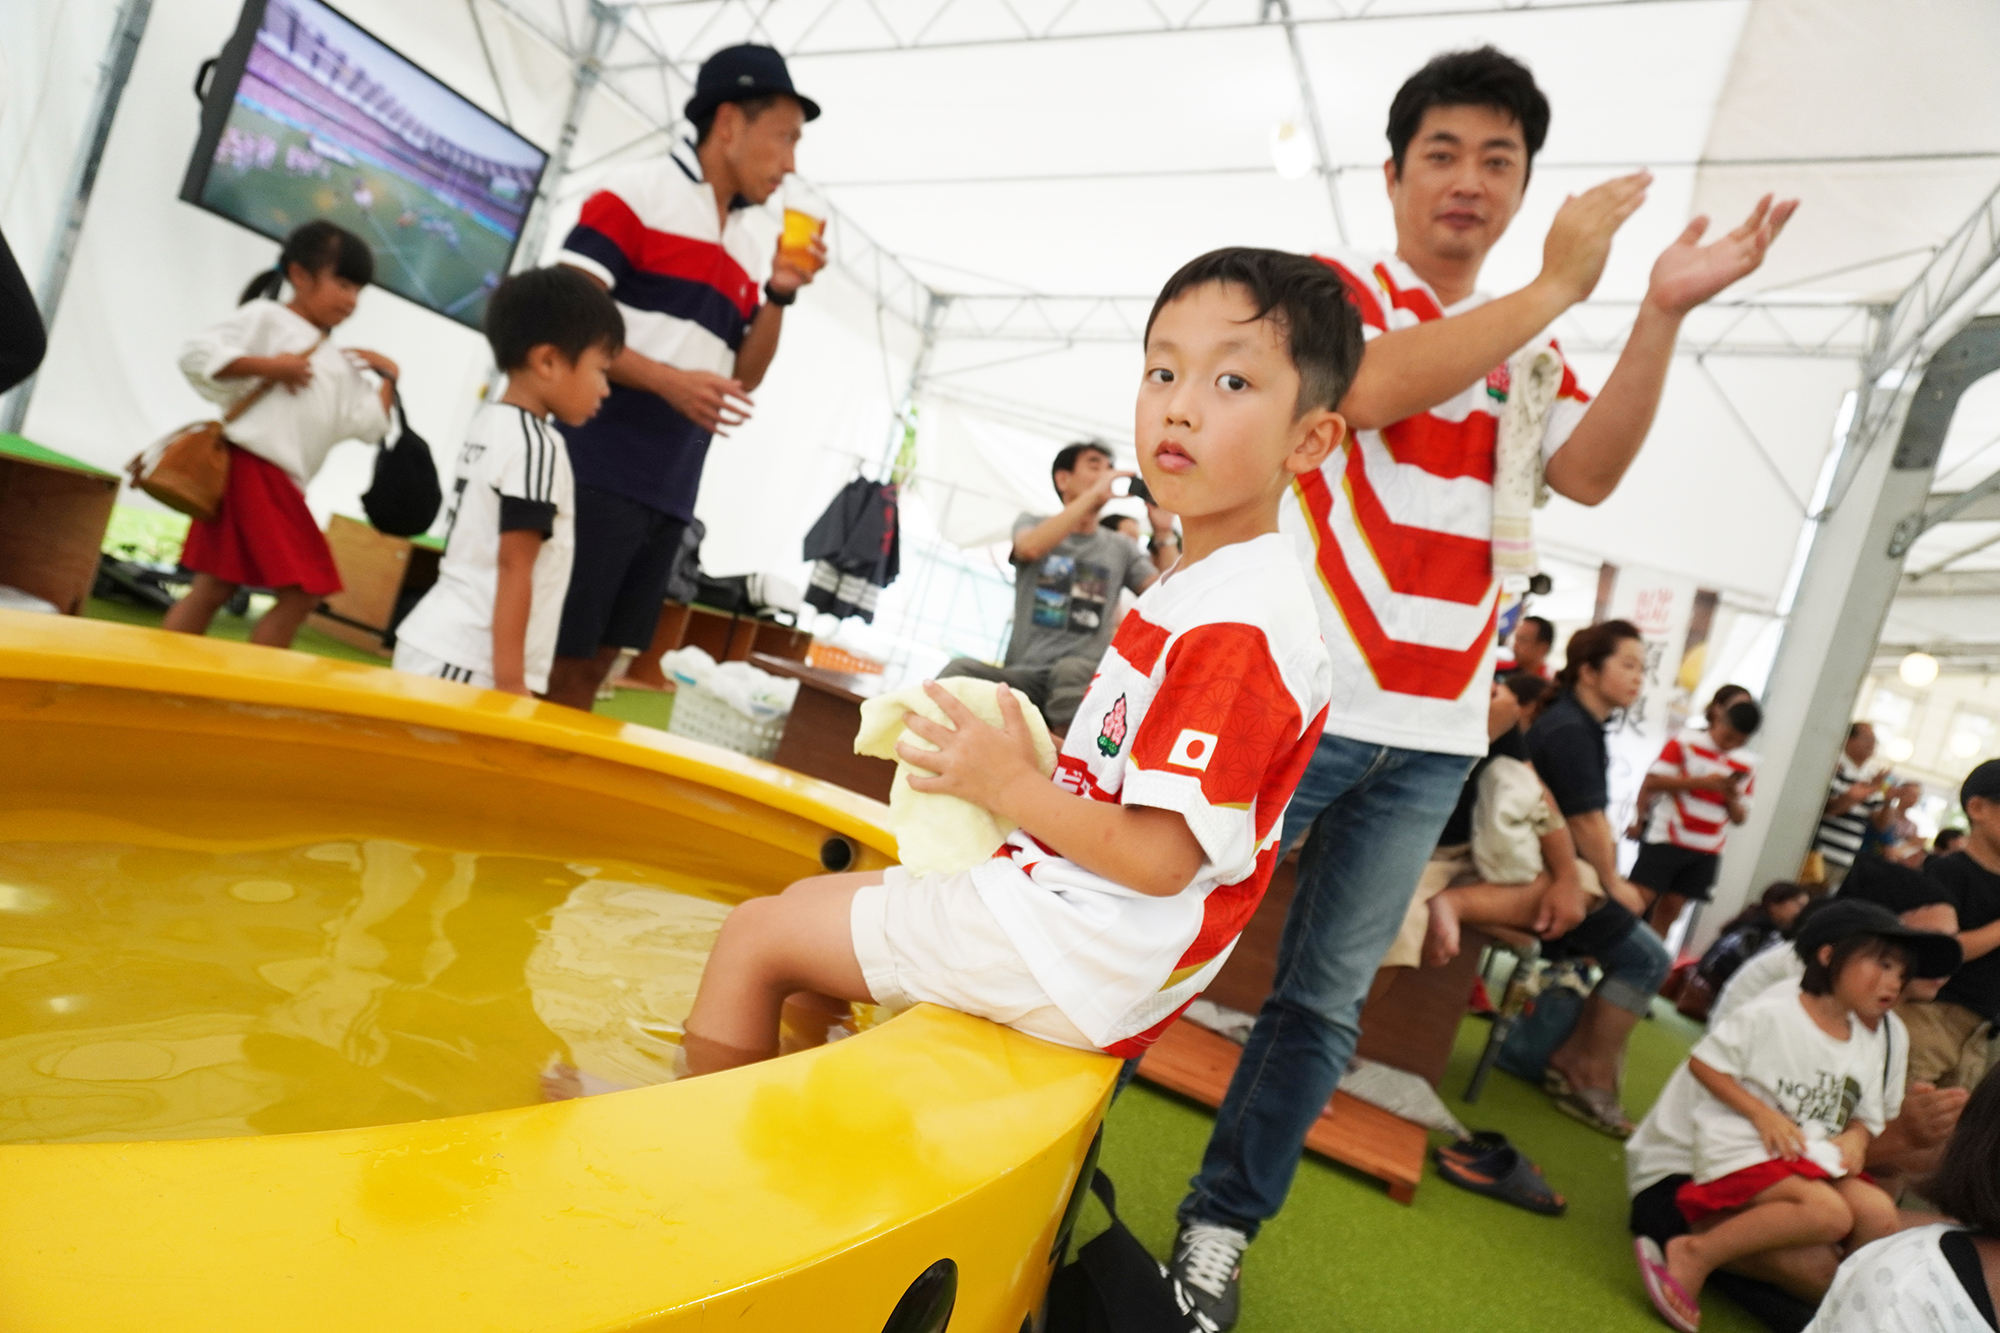 RUGBY WORLD CUP JAPAN FANZONE